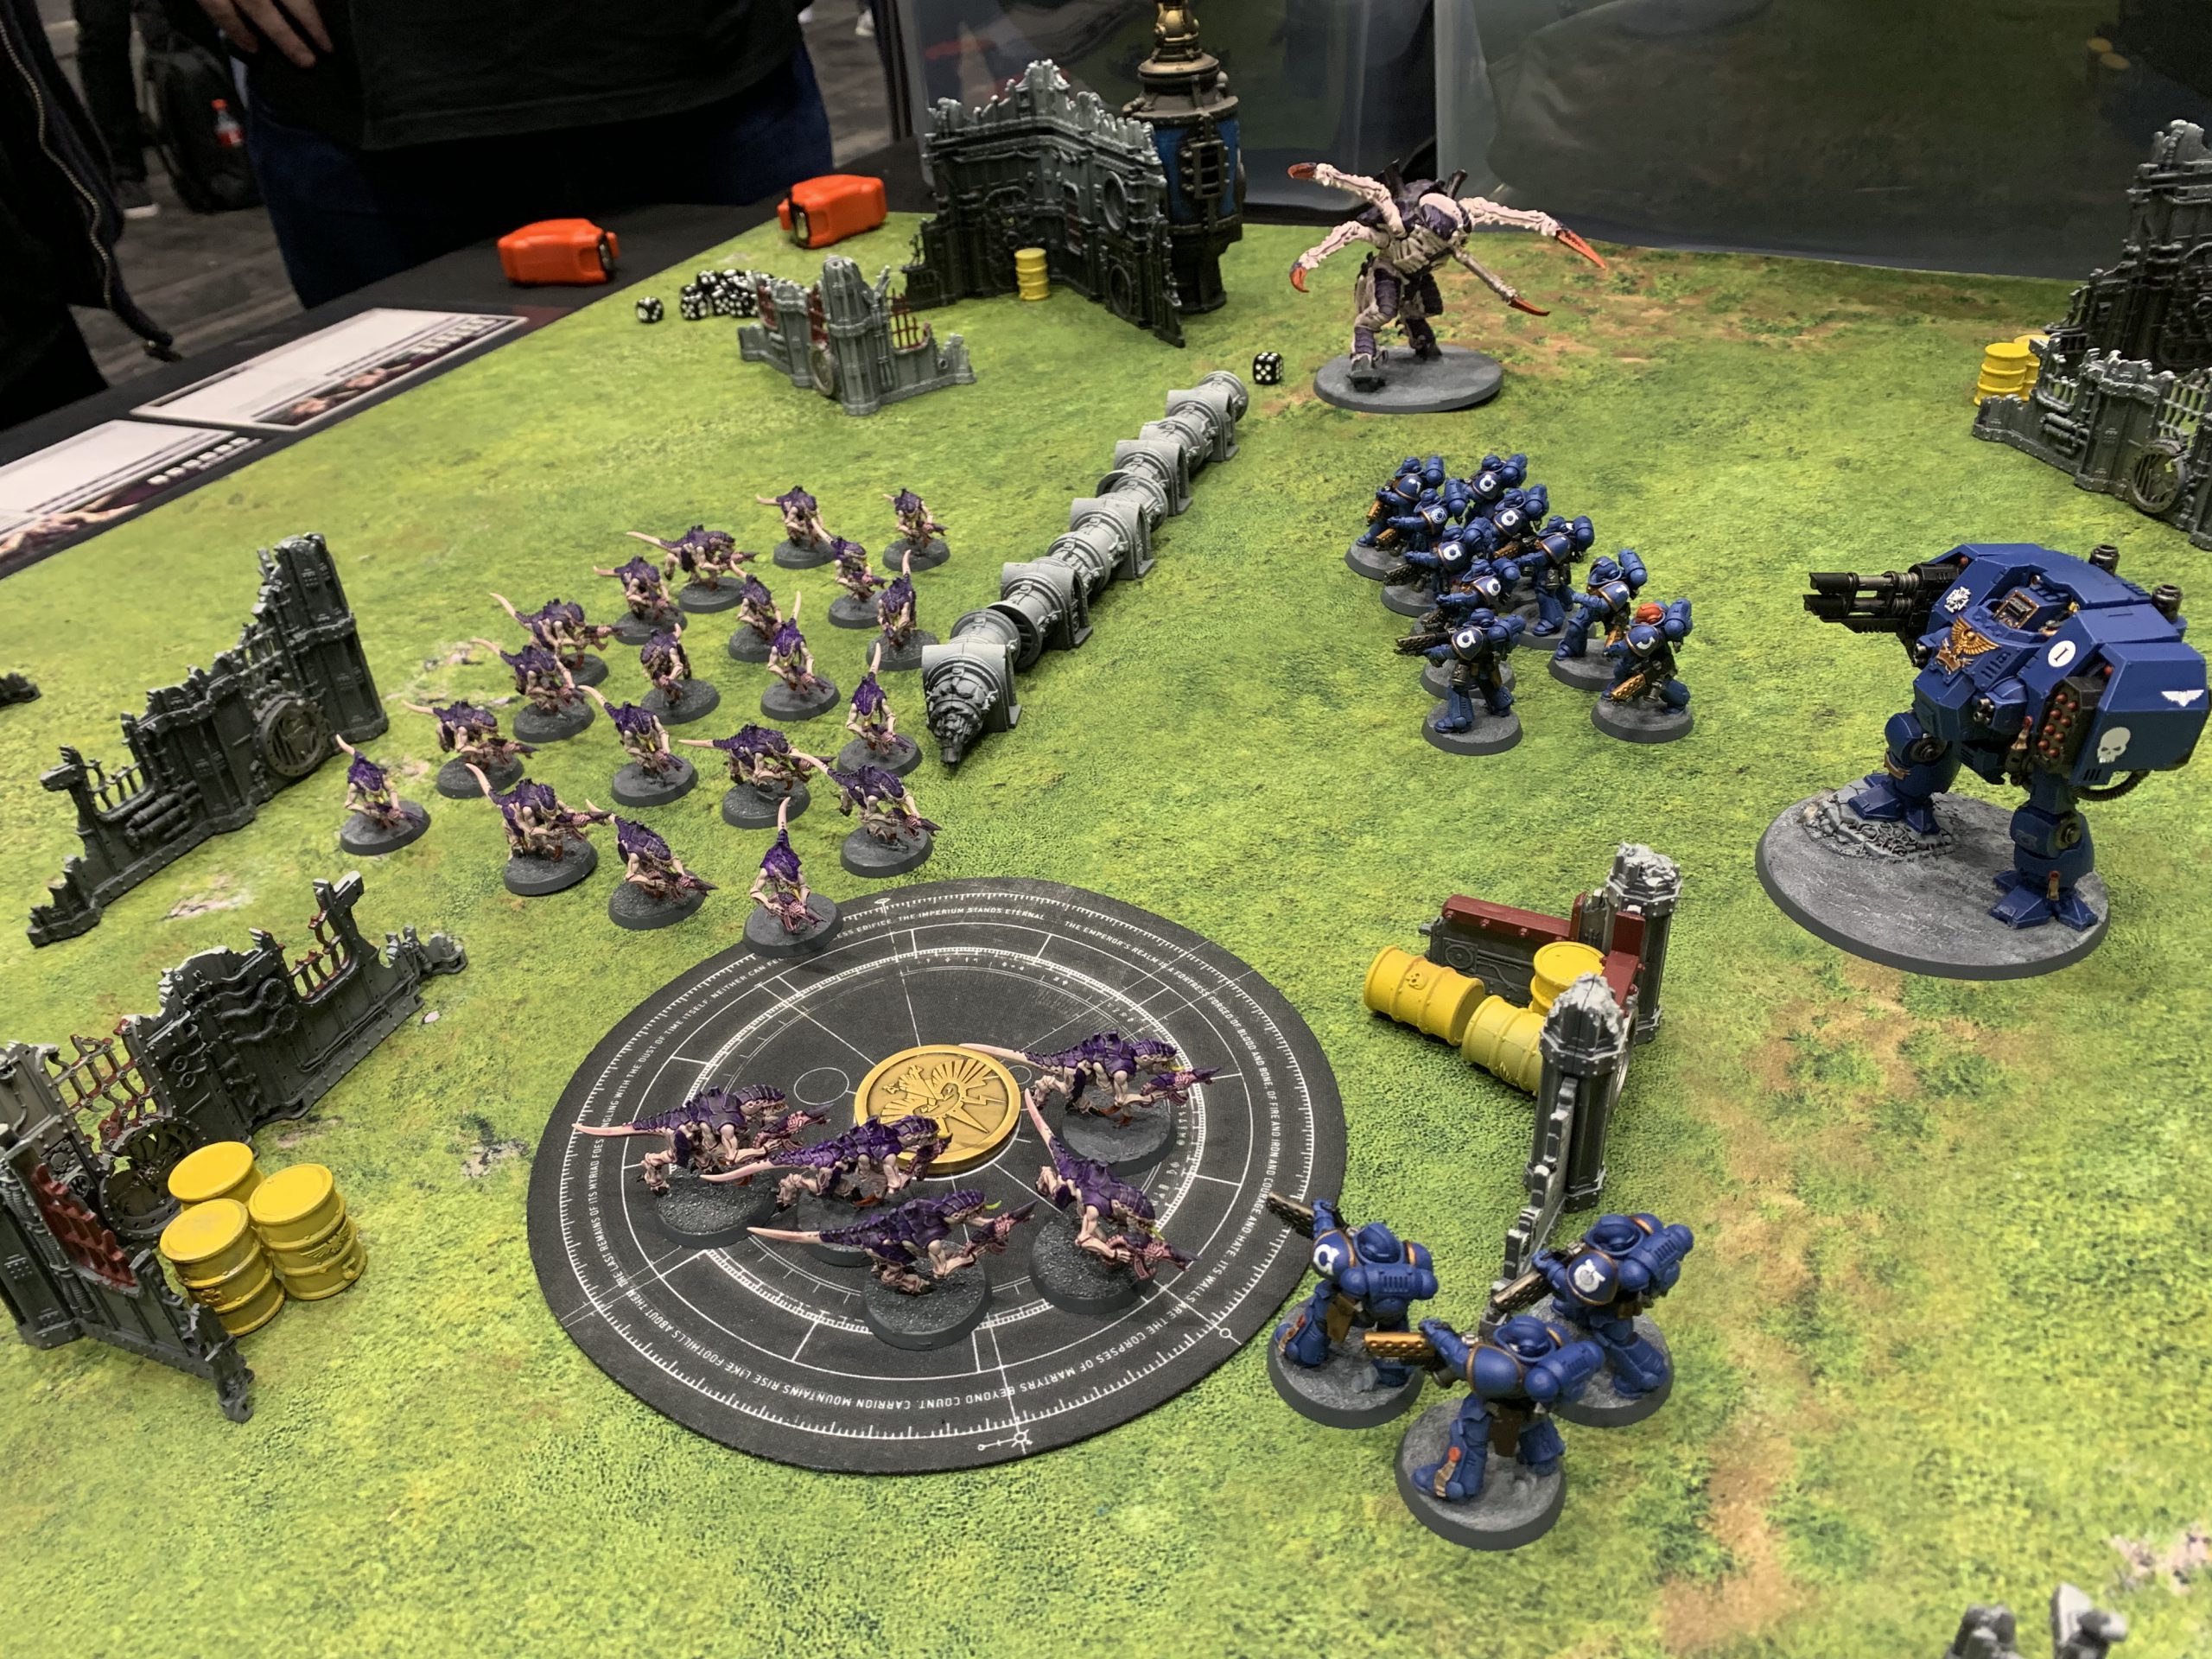 The Warcry Preview – Reporting from Warhammer Fest